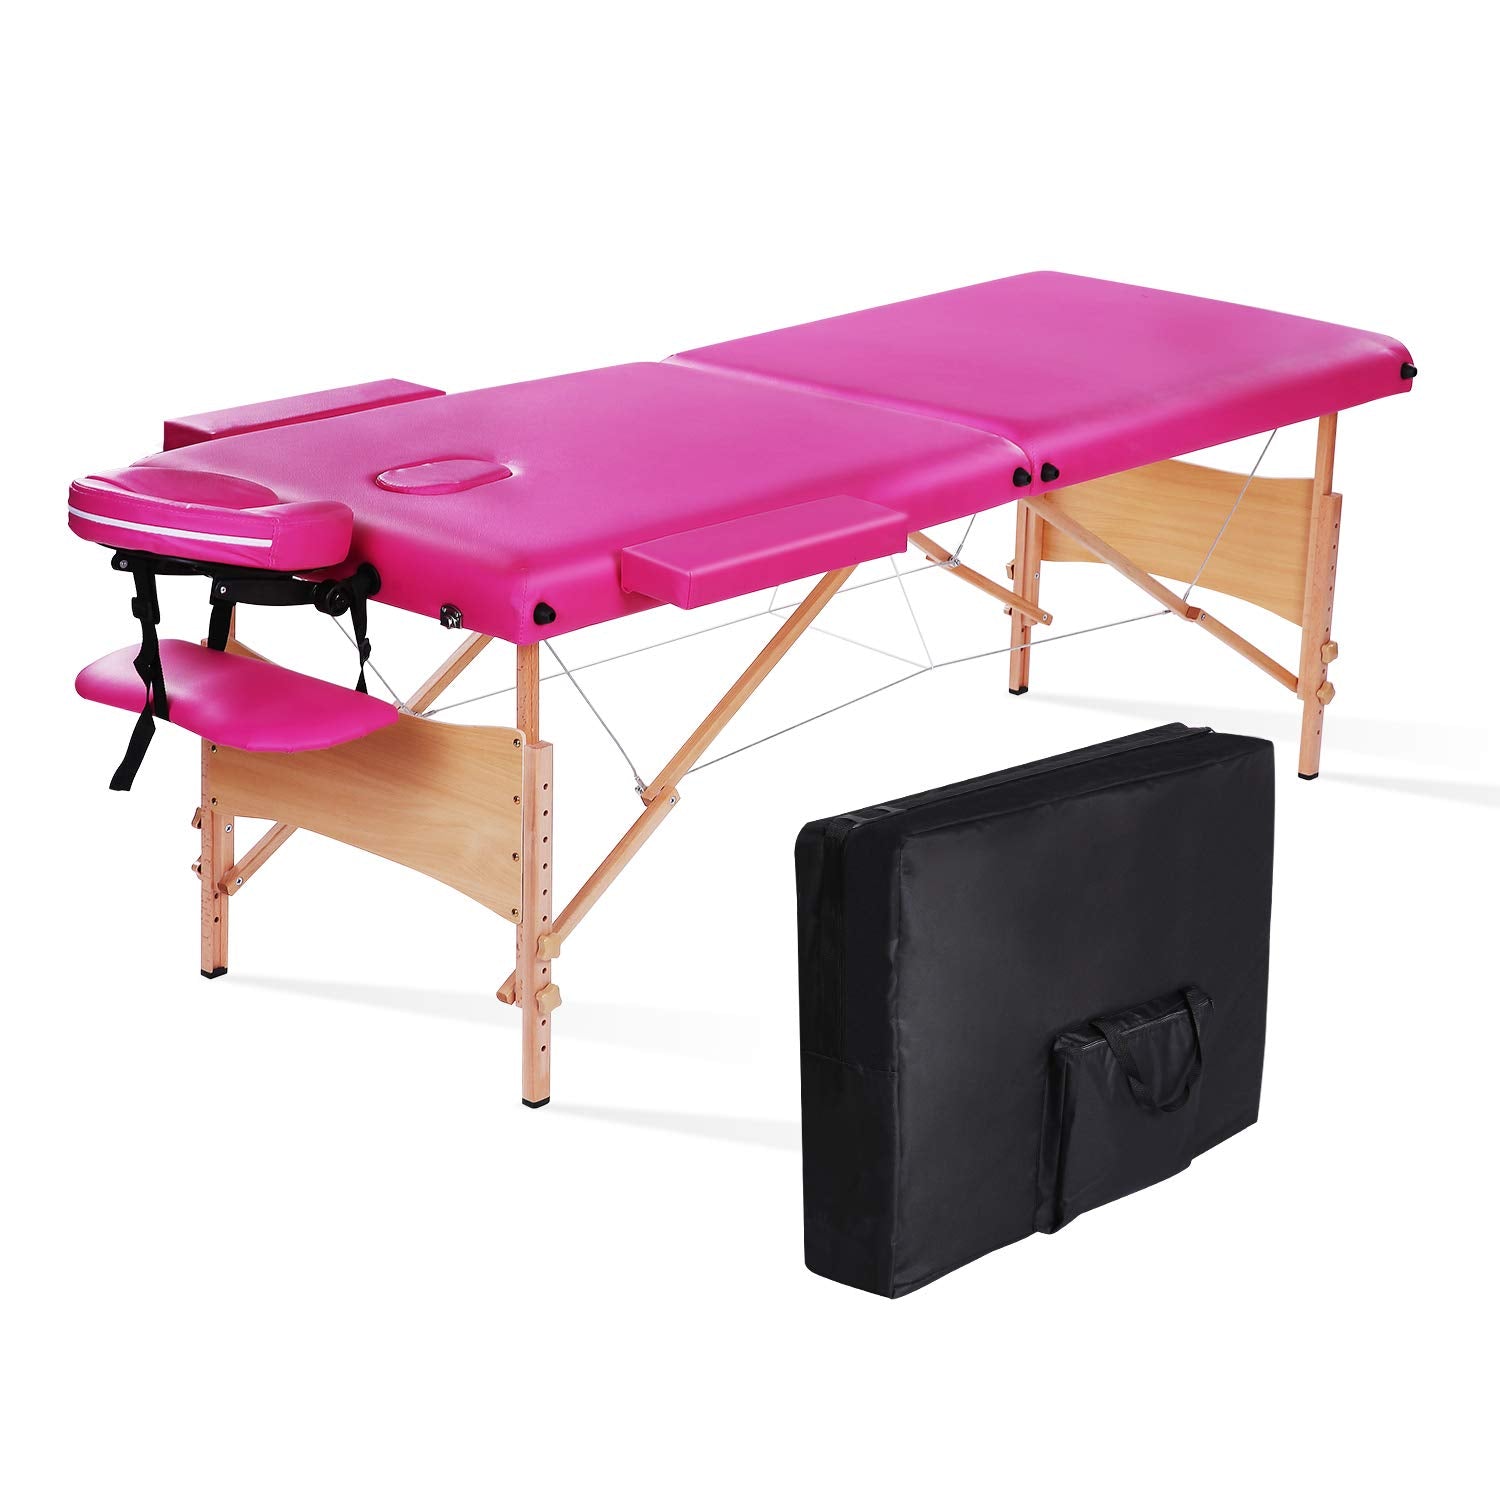 Load image into Gallery viewer, Massage Table Massage Bed SPA Bed Professional Lash Bed Portable Facial Bed 2 Section Height Adjustable with Carrying Bag
